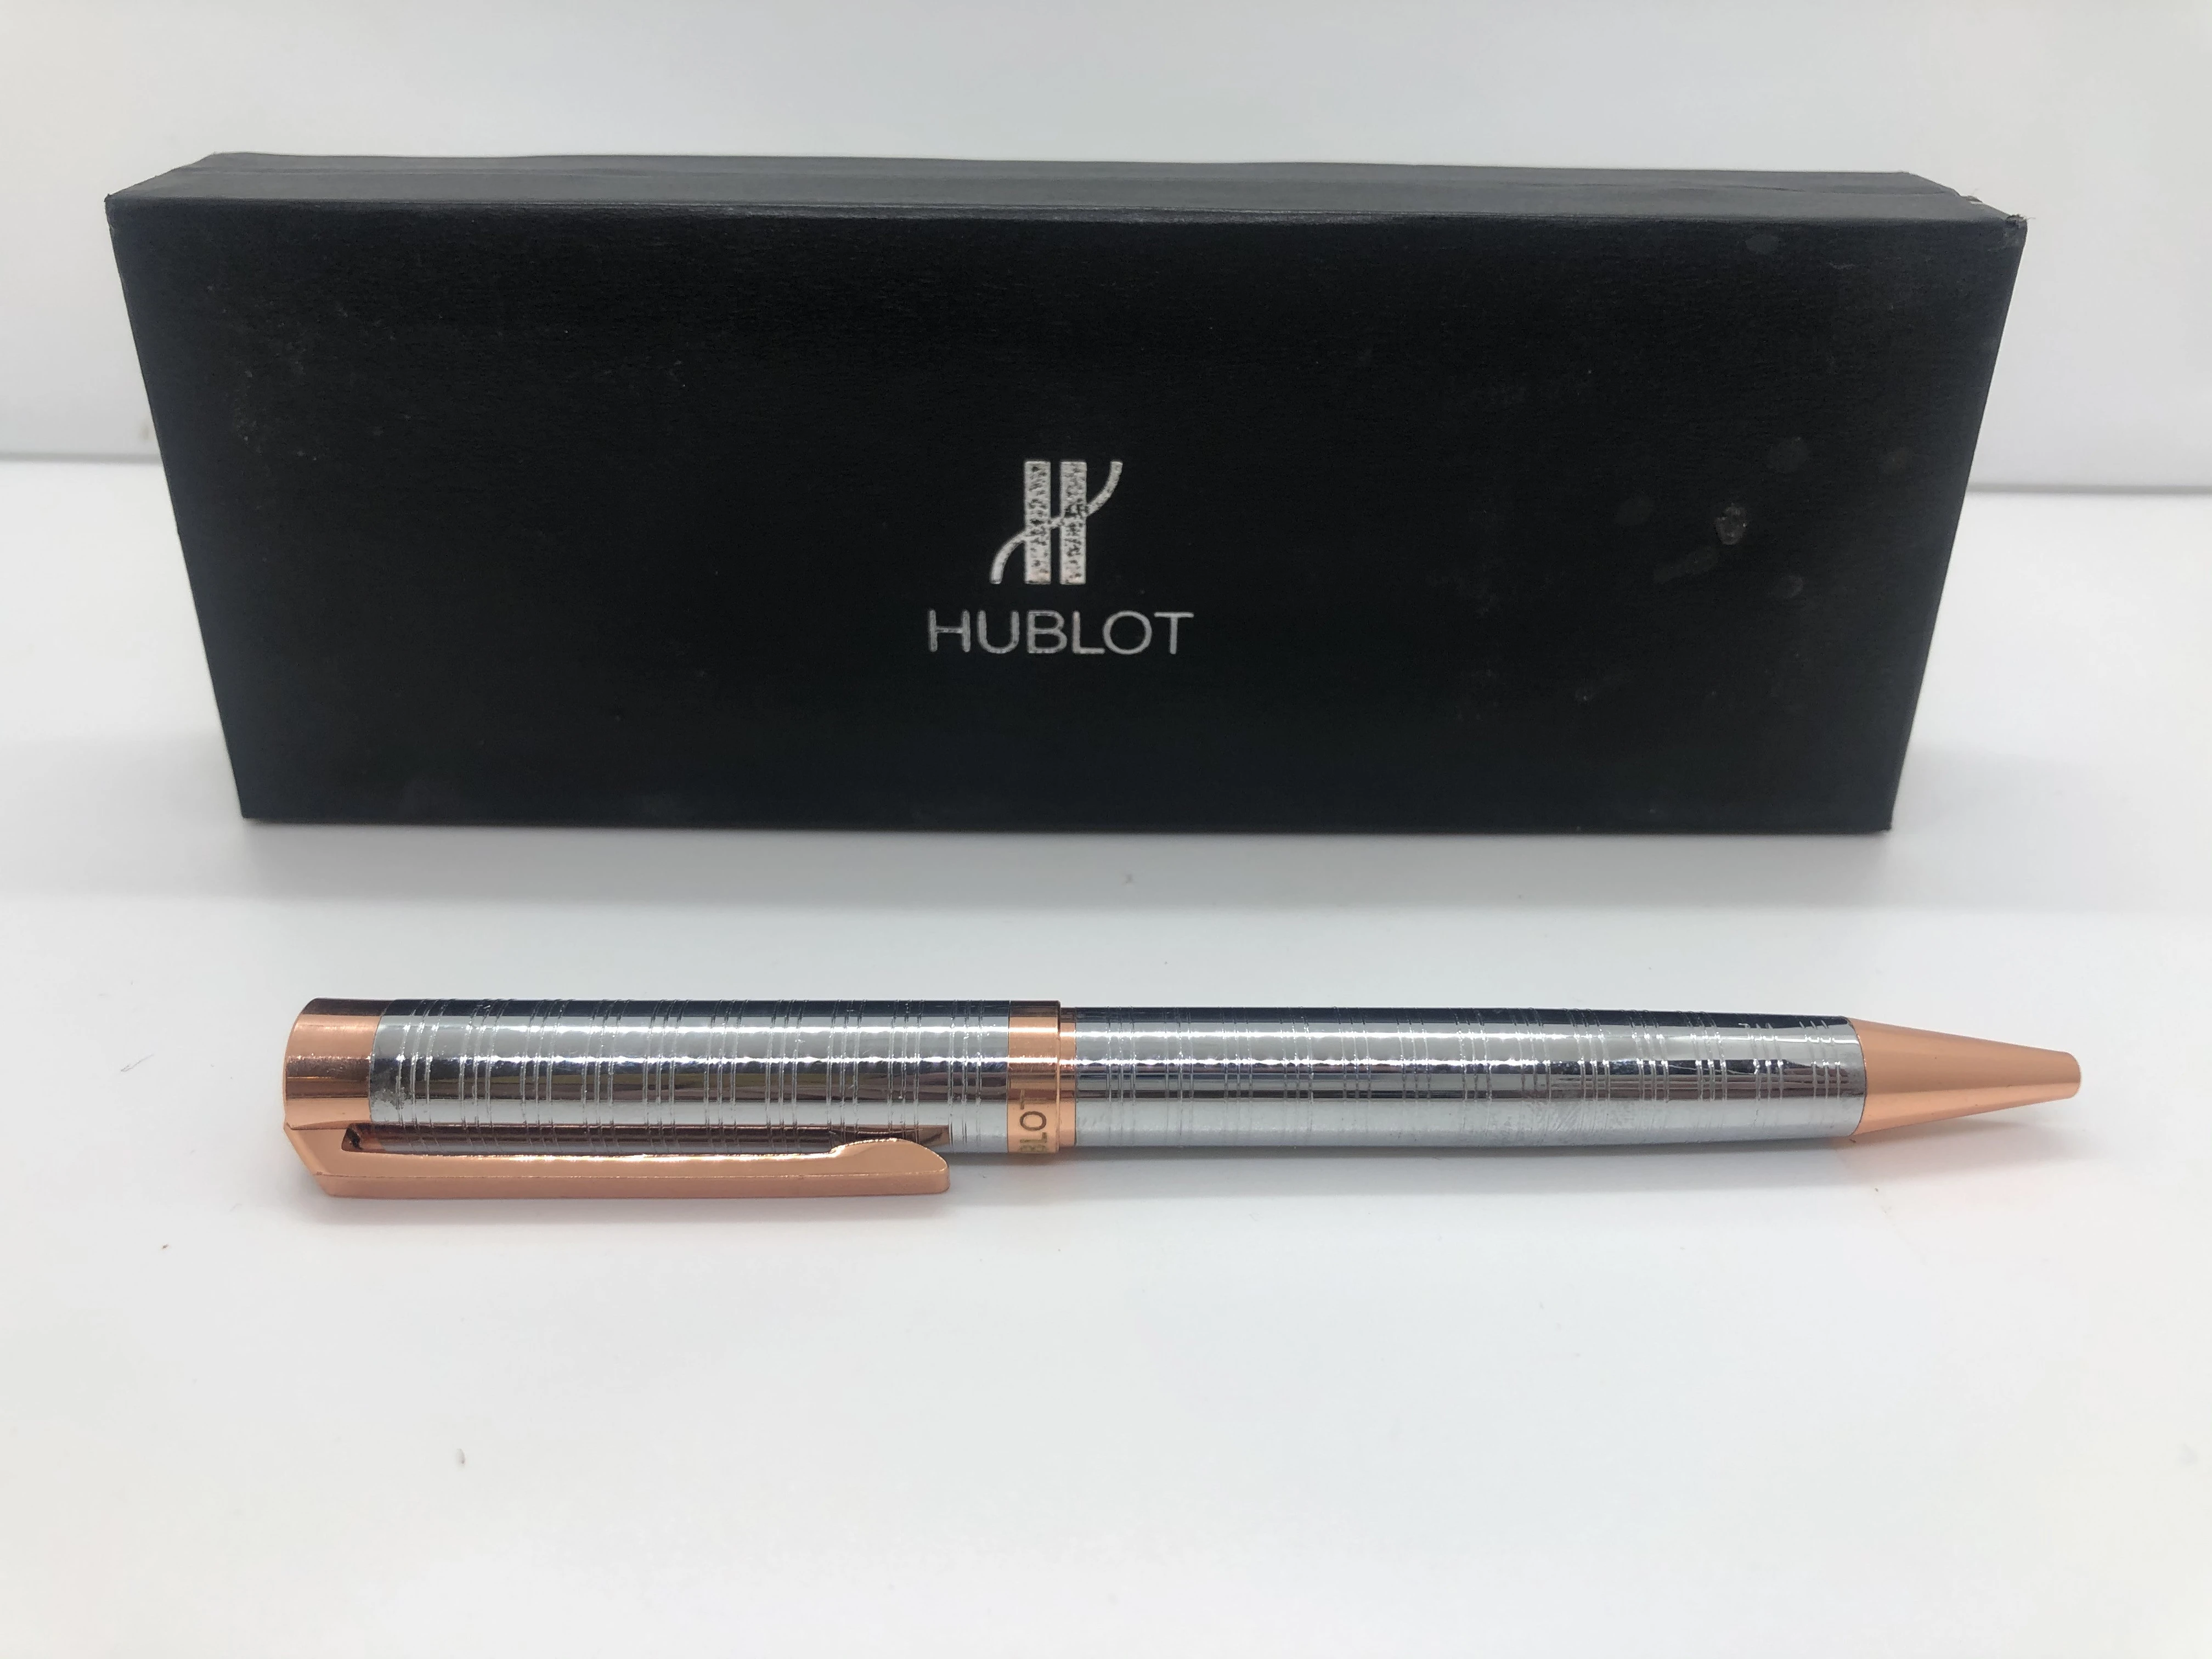 Pen of Hublot, rose gold * silver - with engraved touches - with the brand's logo on top and engraved in the rotation